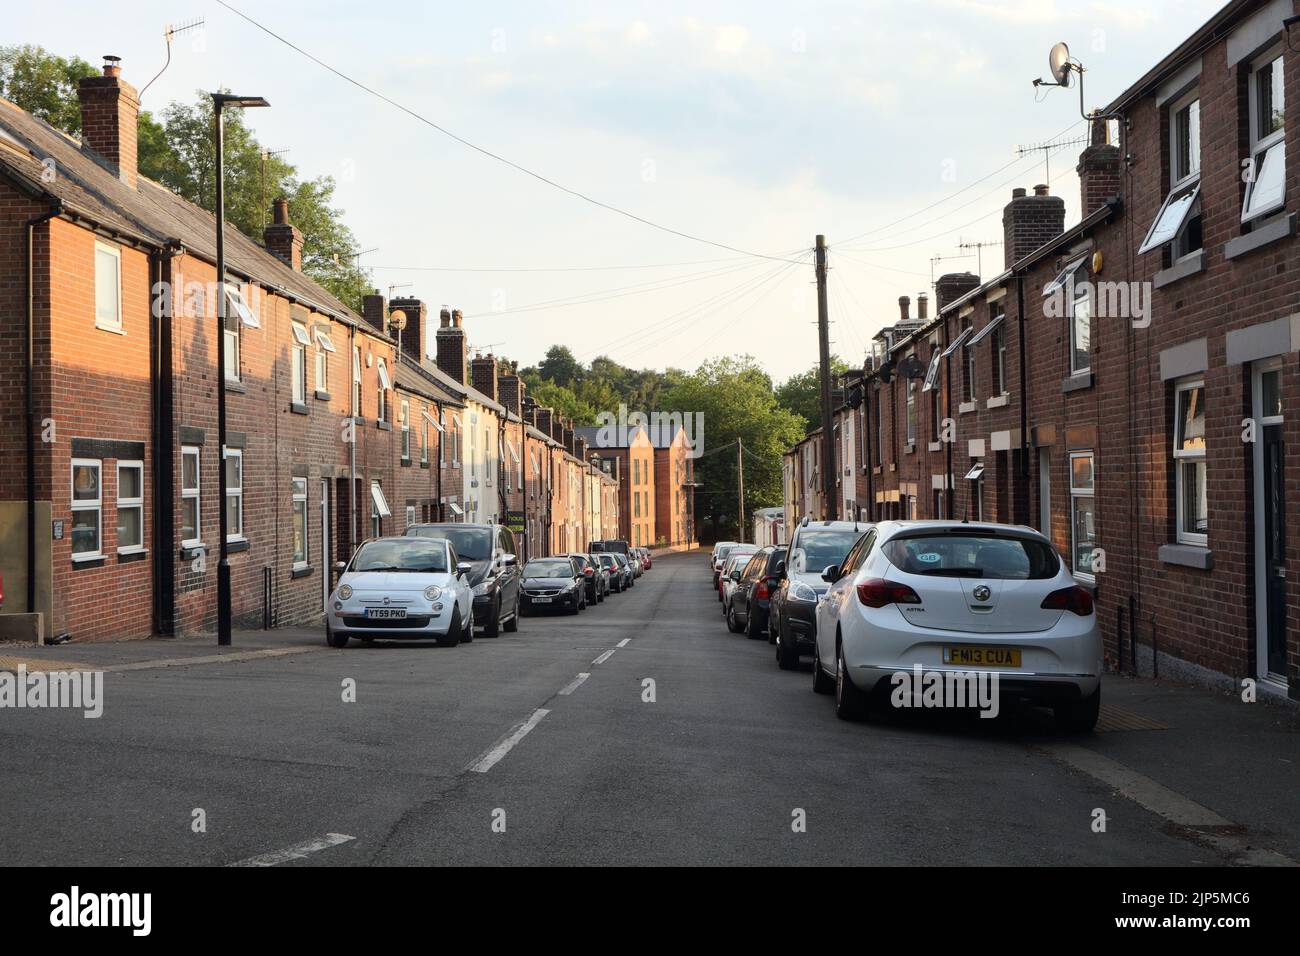 Athol road, Residential road of terraced houses, Sheffield England. Street view Stock Photo